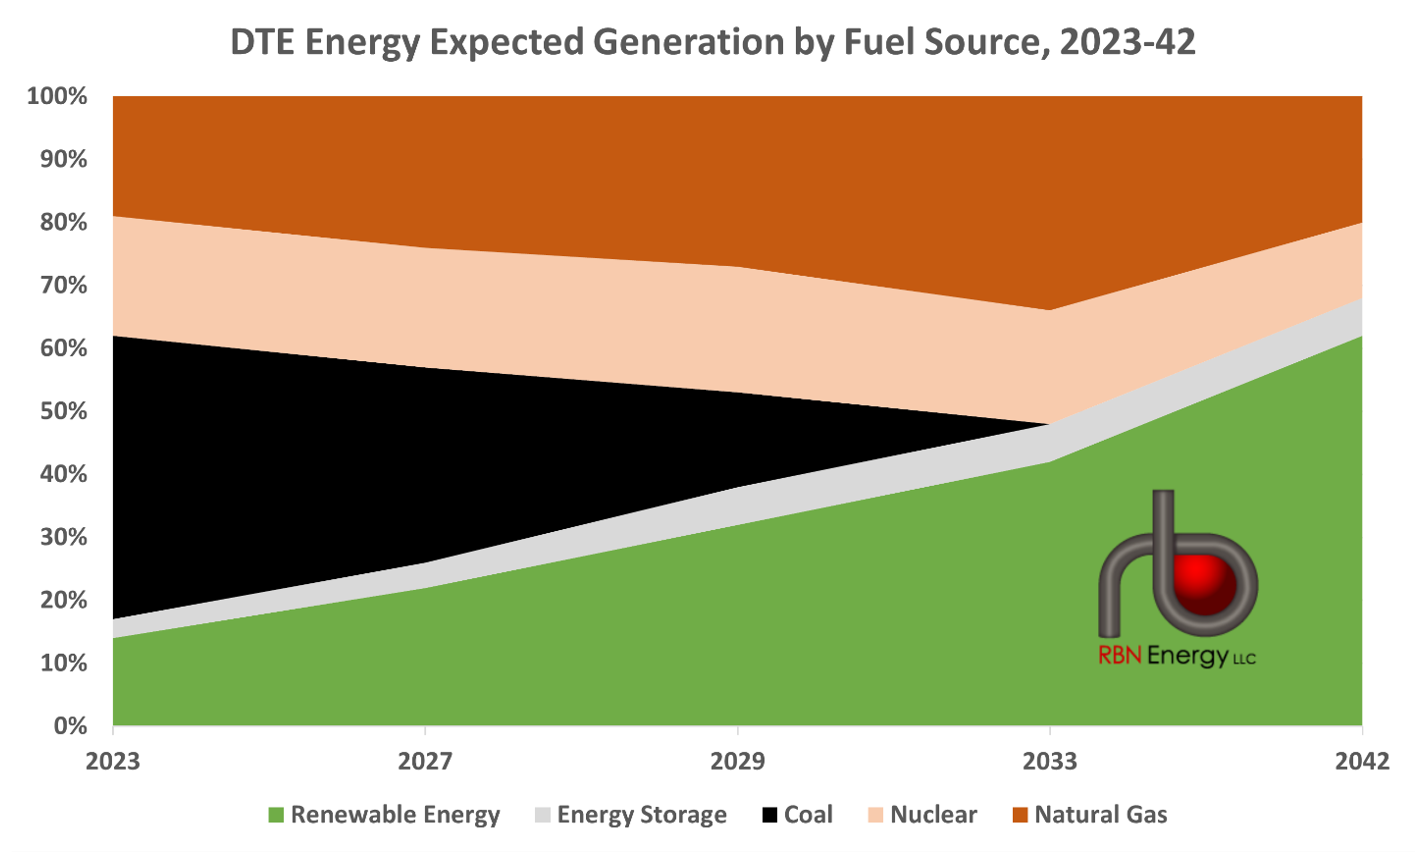 https://rbnenergy.com/sites/default/files/field/image/Fig2_DTE%20Energy%20Expected%20Generation%20by%20Fuel%20Source%2C%202023-42.png